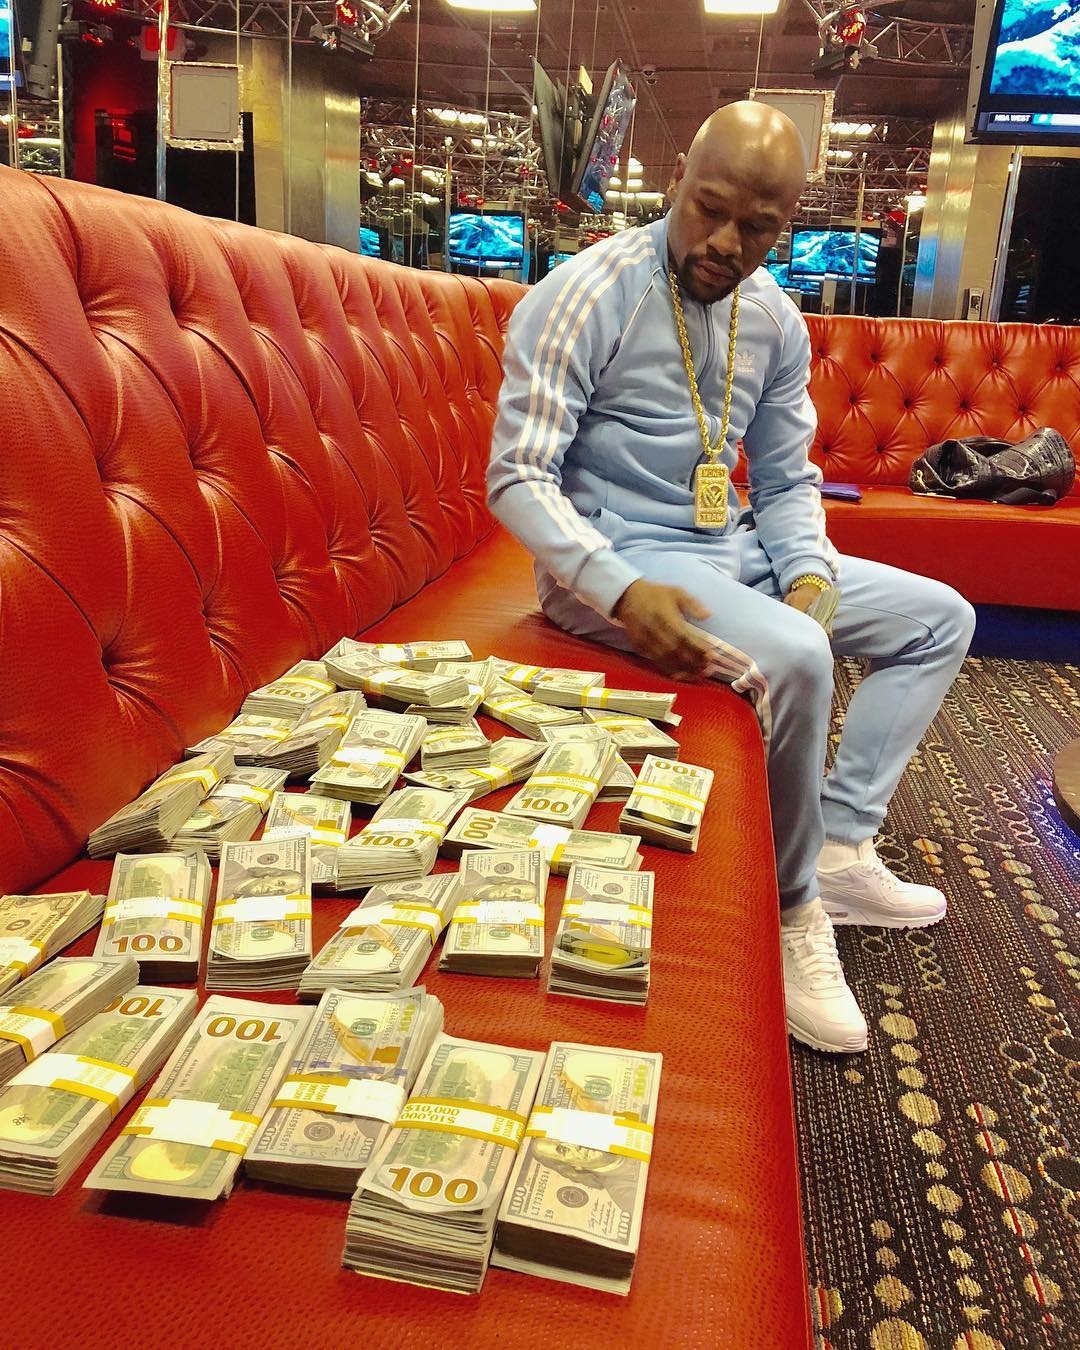 Floyd Mayweather, boxing legend, is building the TENTH skyscraper. He boasts a $50,000-per-month investment